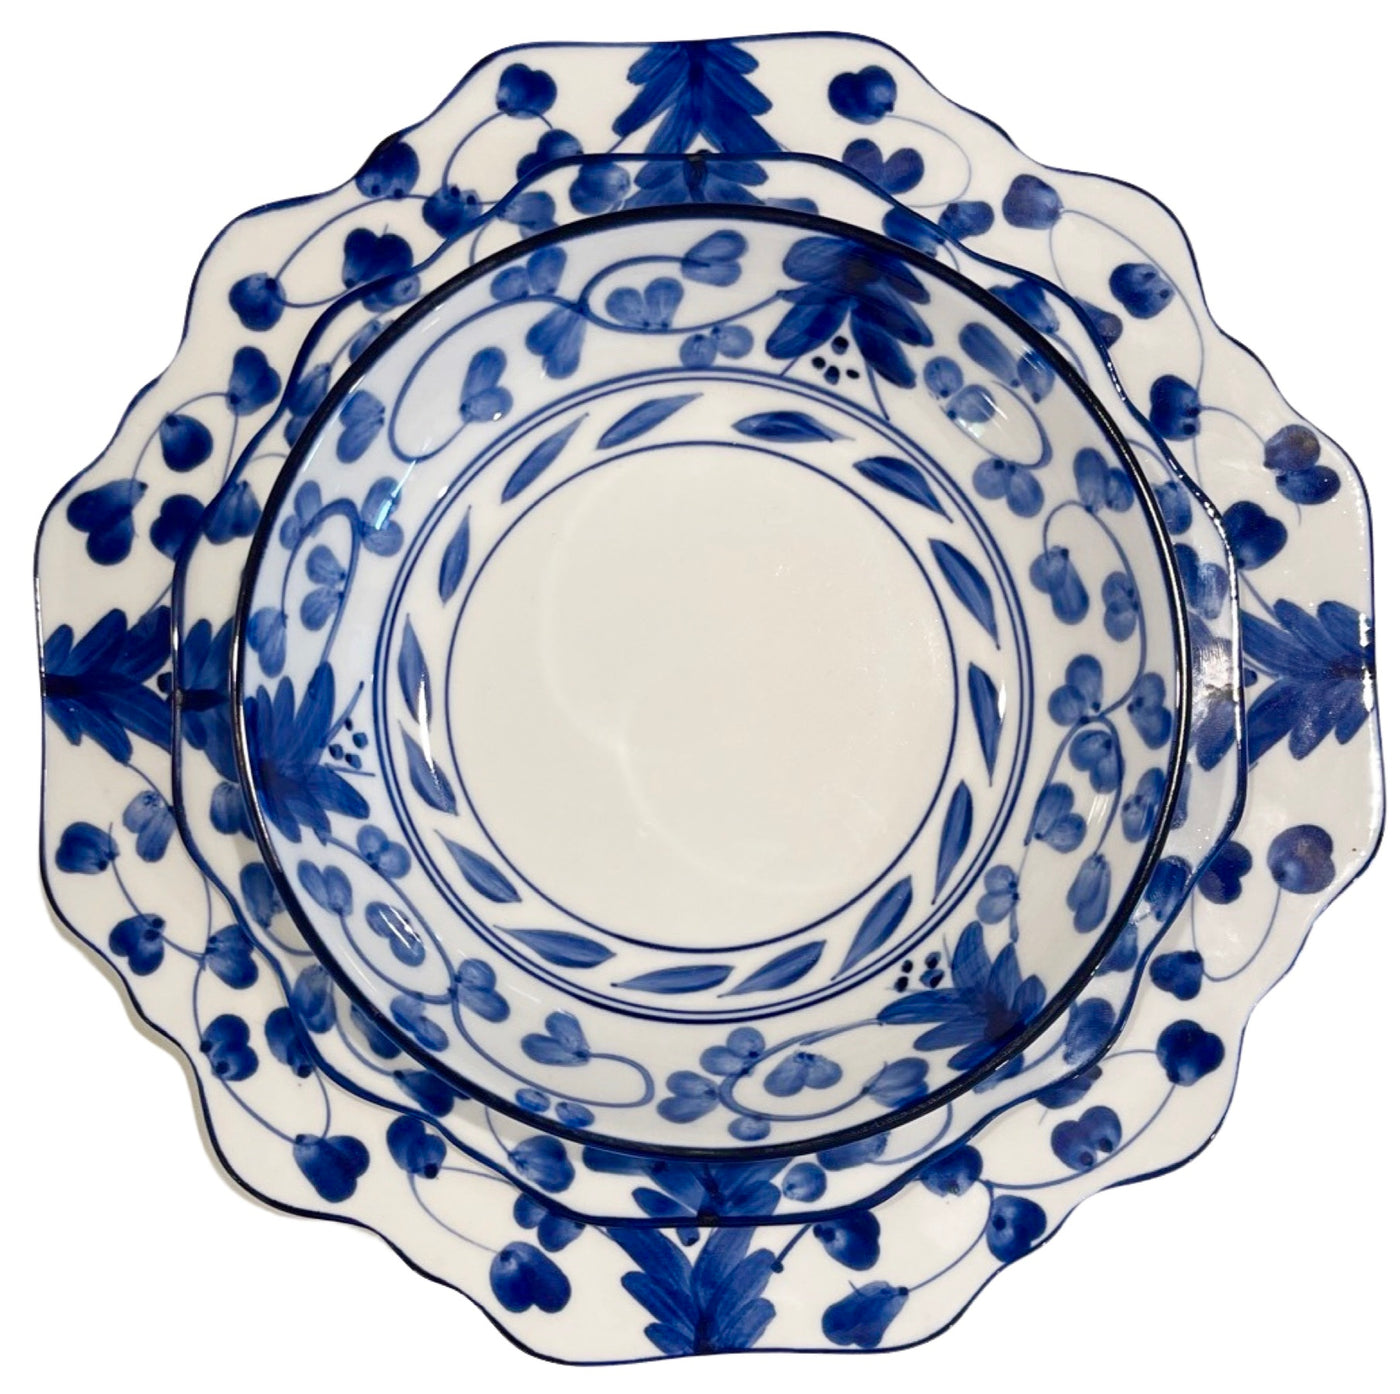 12pc (4 Person) 'Lily' Dinner Set - Blue